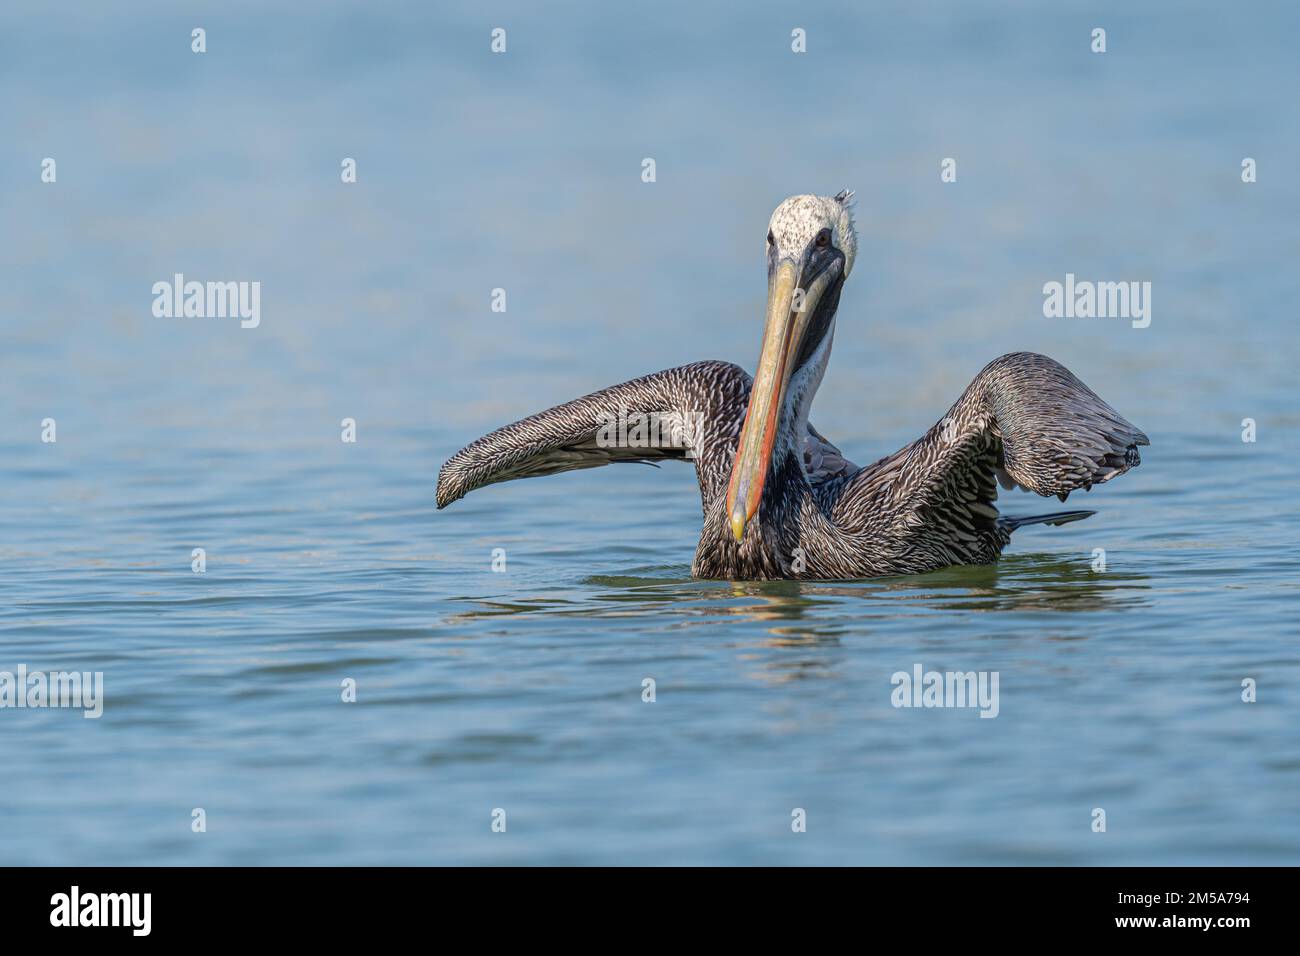 A Brown Pelican (Pelecanus occidentalis) swimming on the ocean surface extends its wings near the Florida Keys, USA. Stock Photo